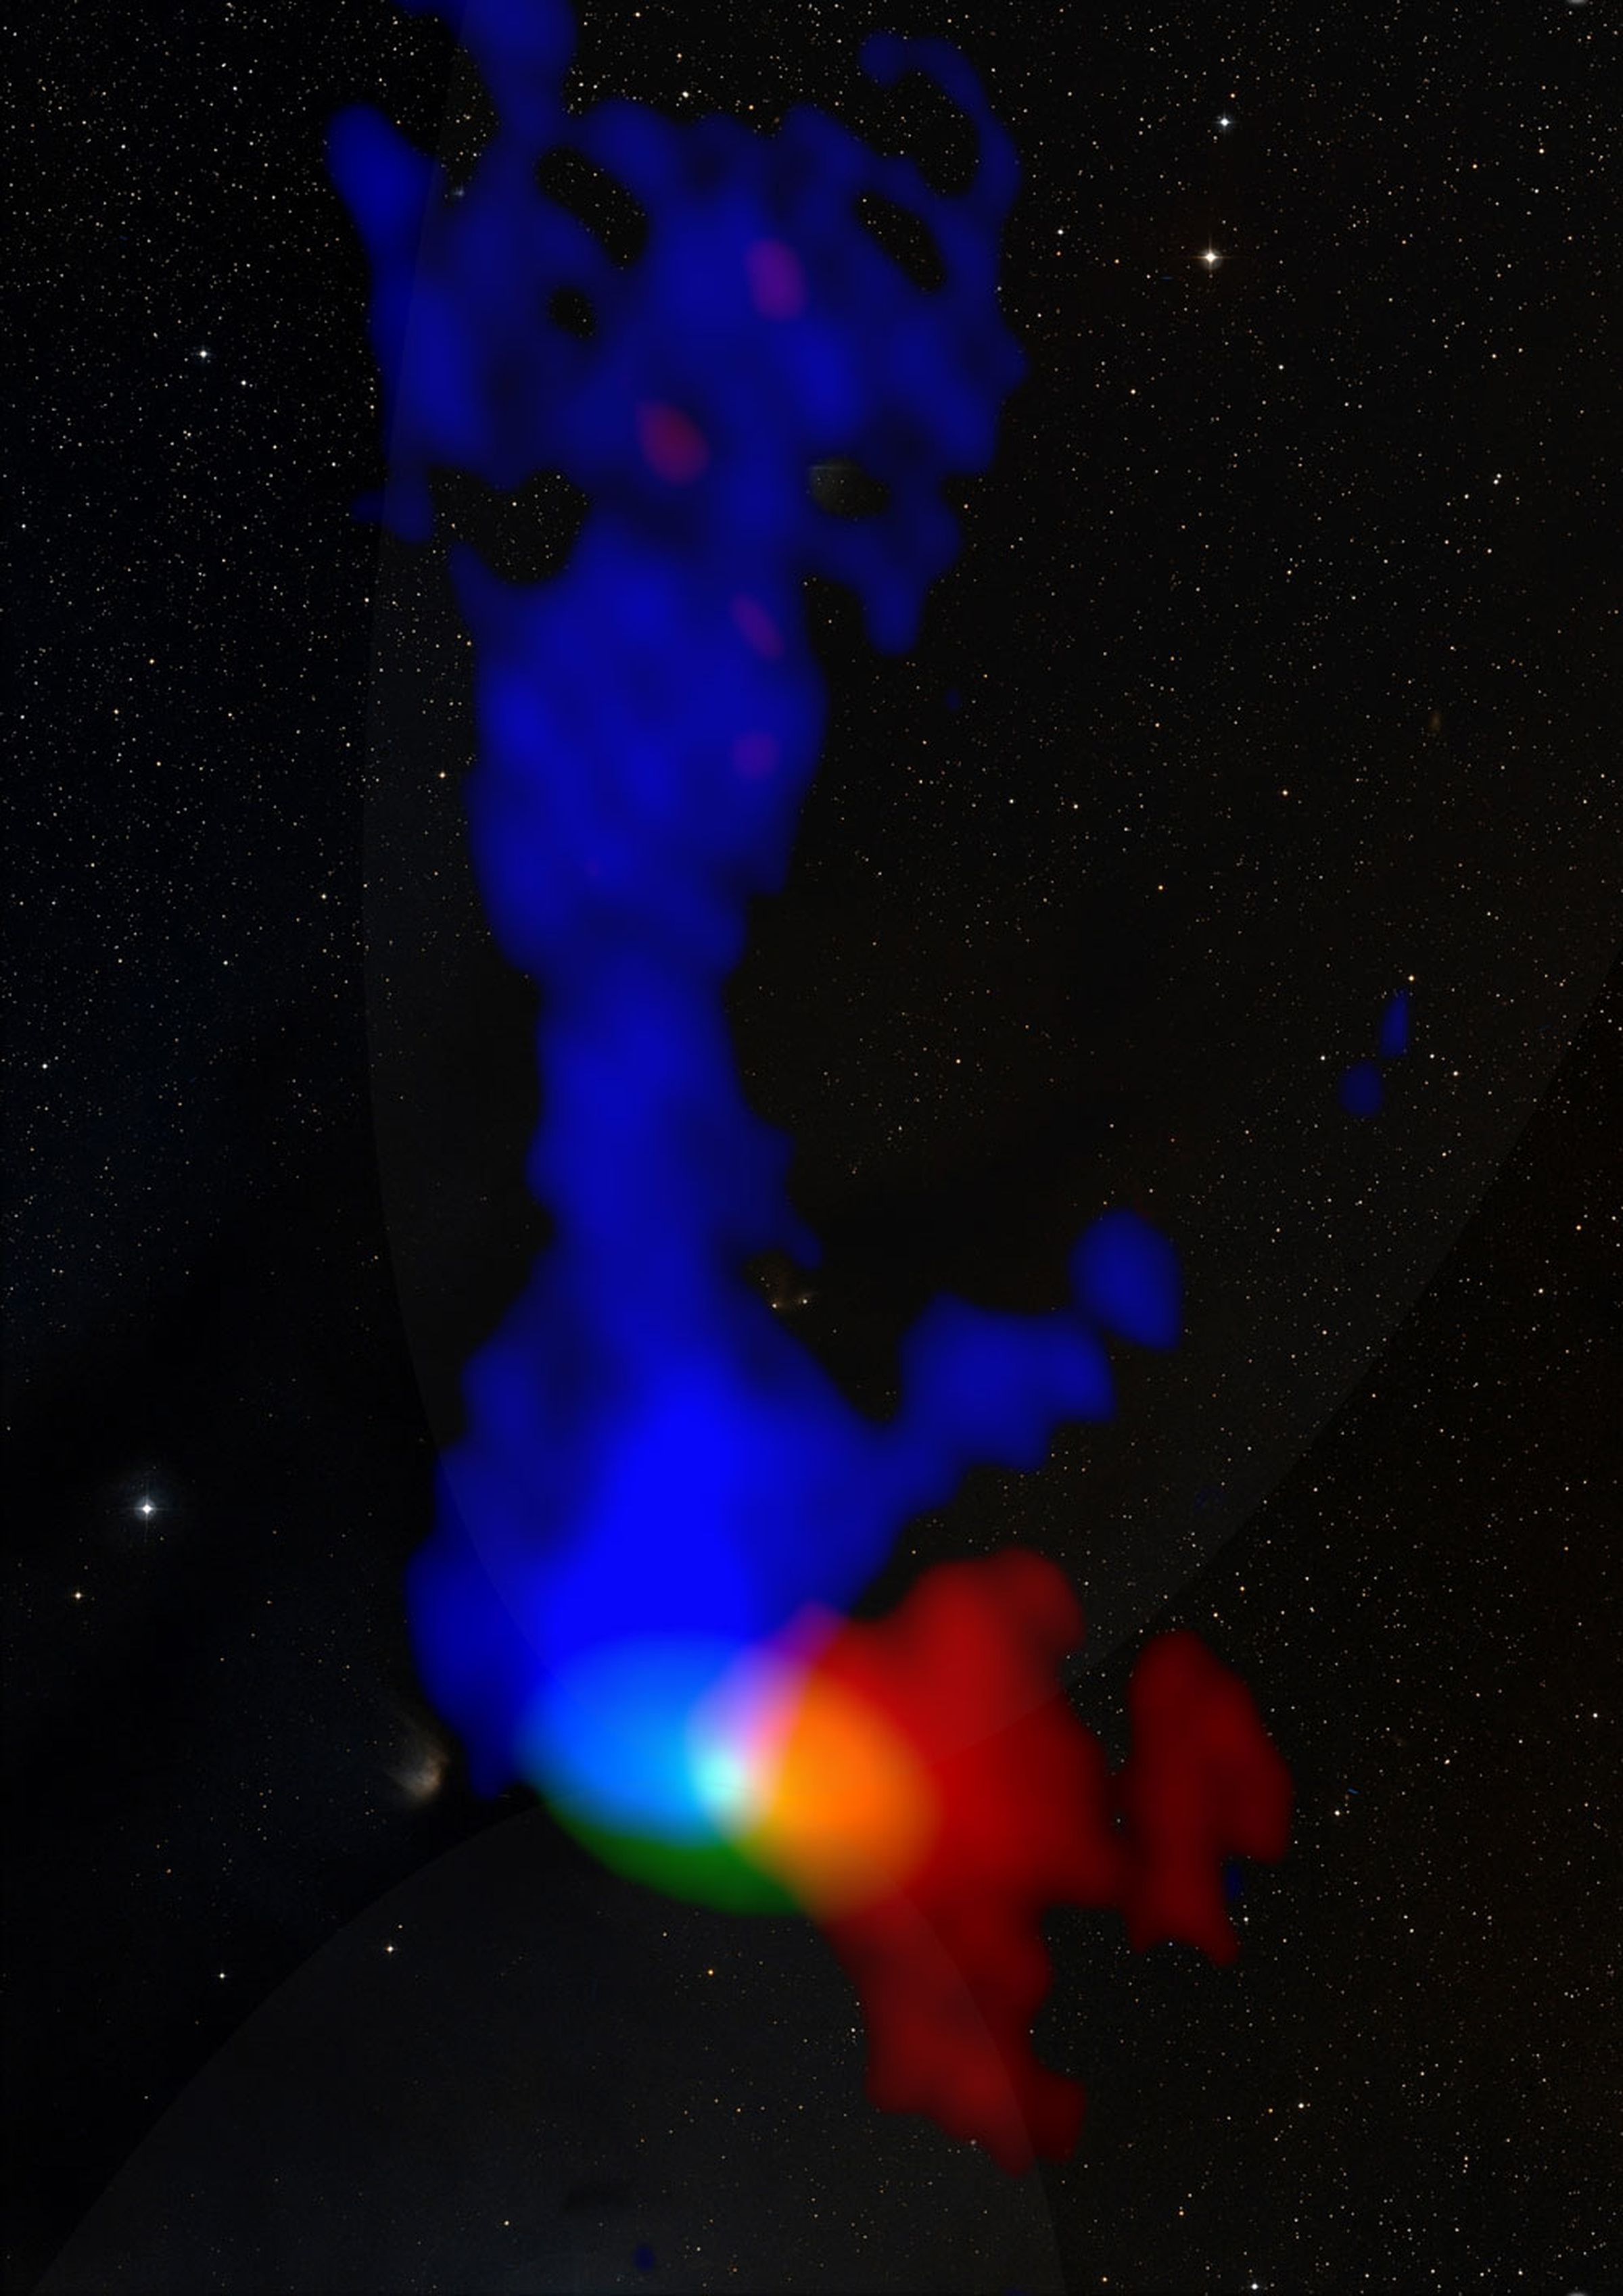 ALMA observations of the young protostar studied by the Niels Bohr Institute researchers.